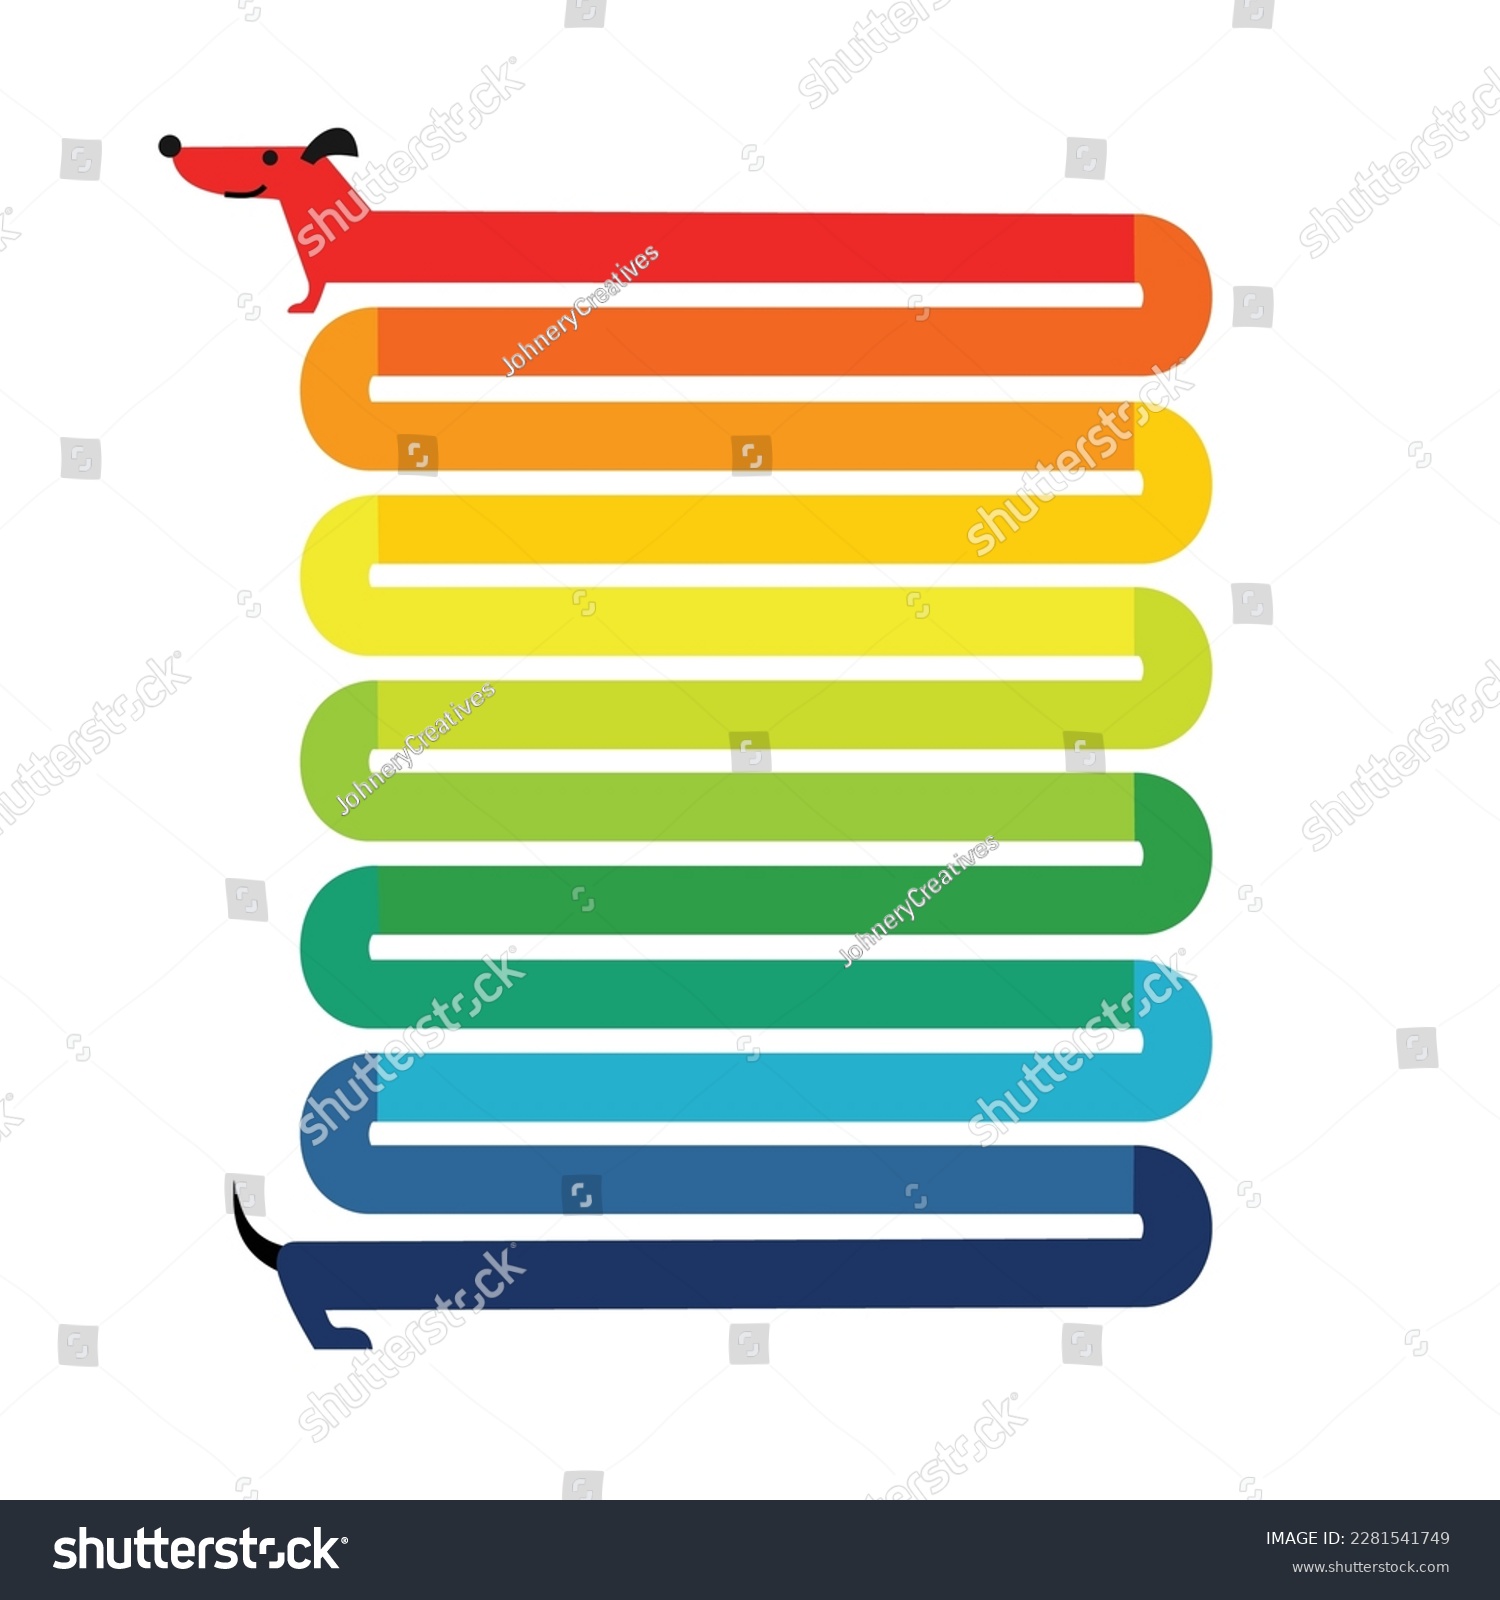 SVG of This dachshund is said to be 100 feet long and made up of the 7 colors of the rainbow. It said that this legendary wiener dog only appears after the rain... svg